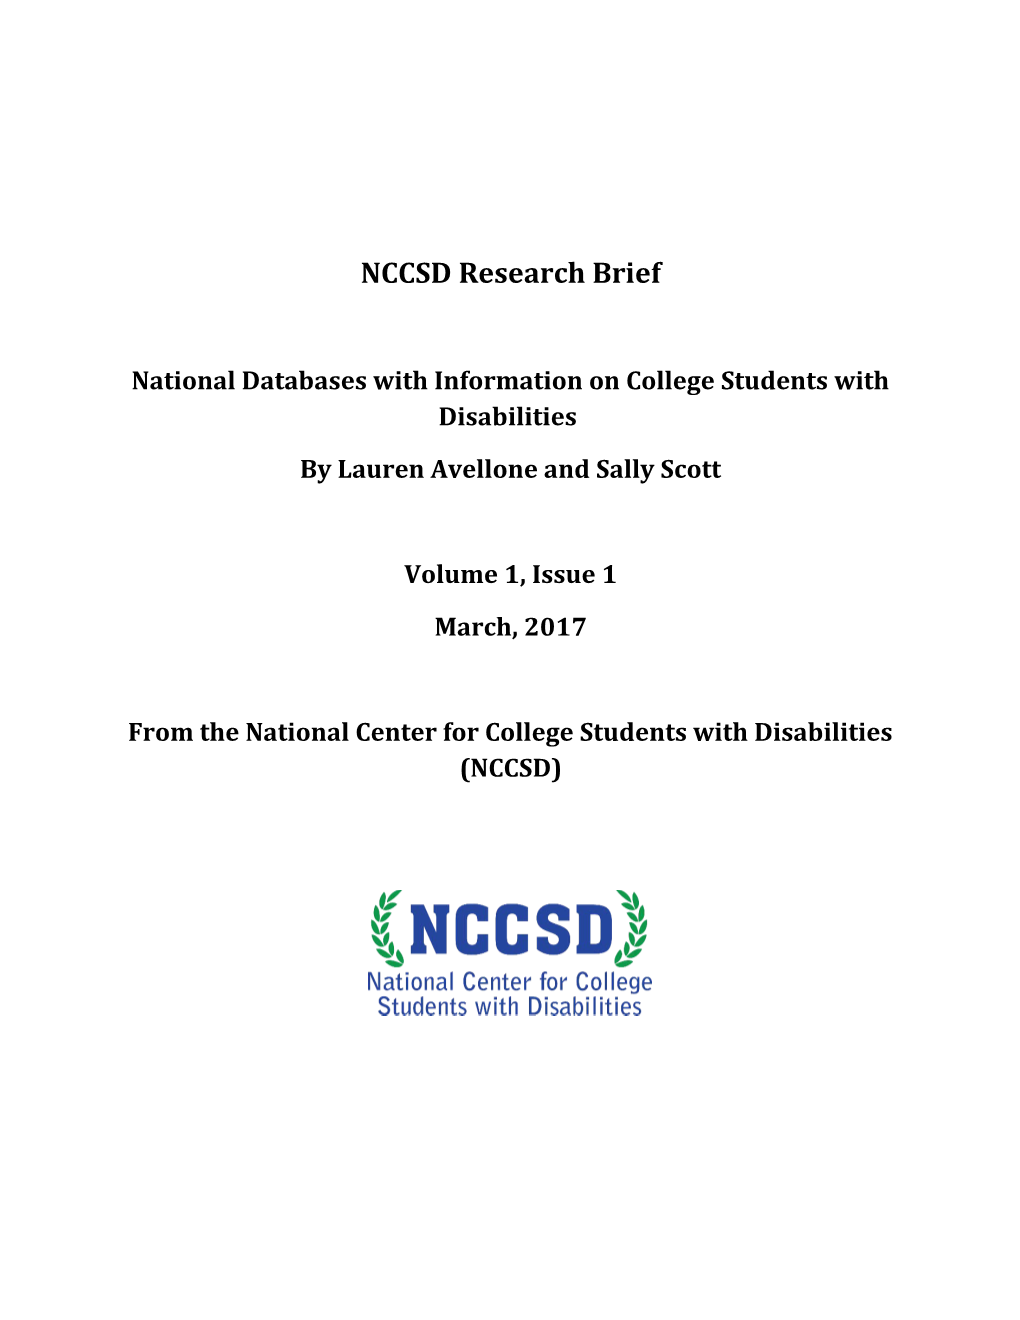 National Databases with Information on College Students with Disabilities